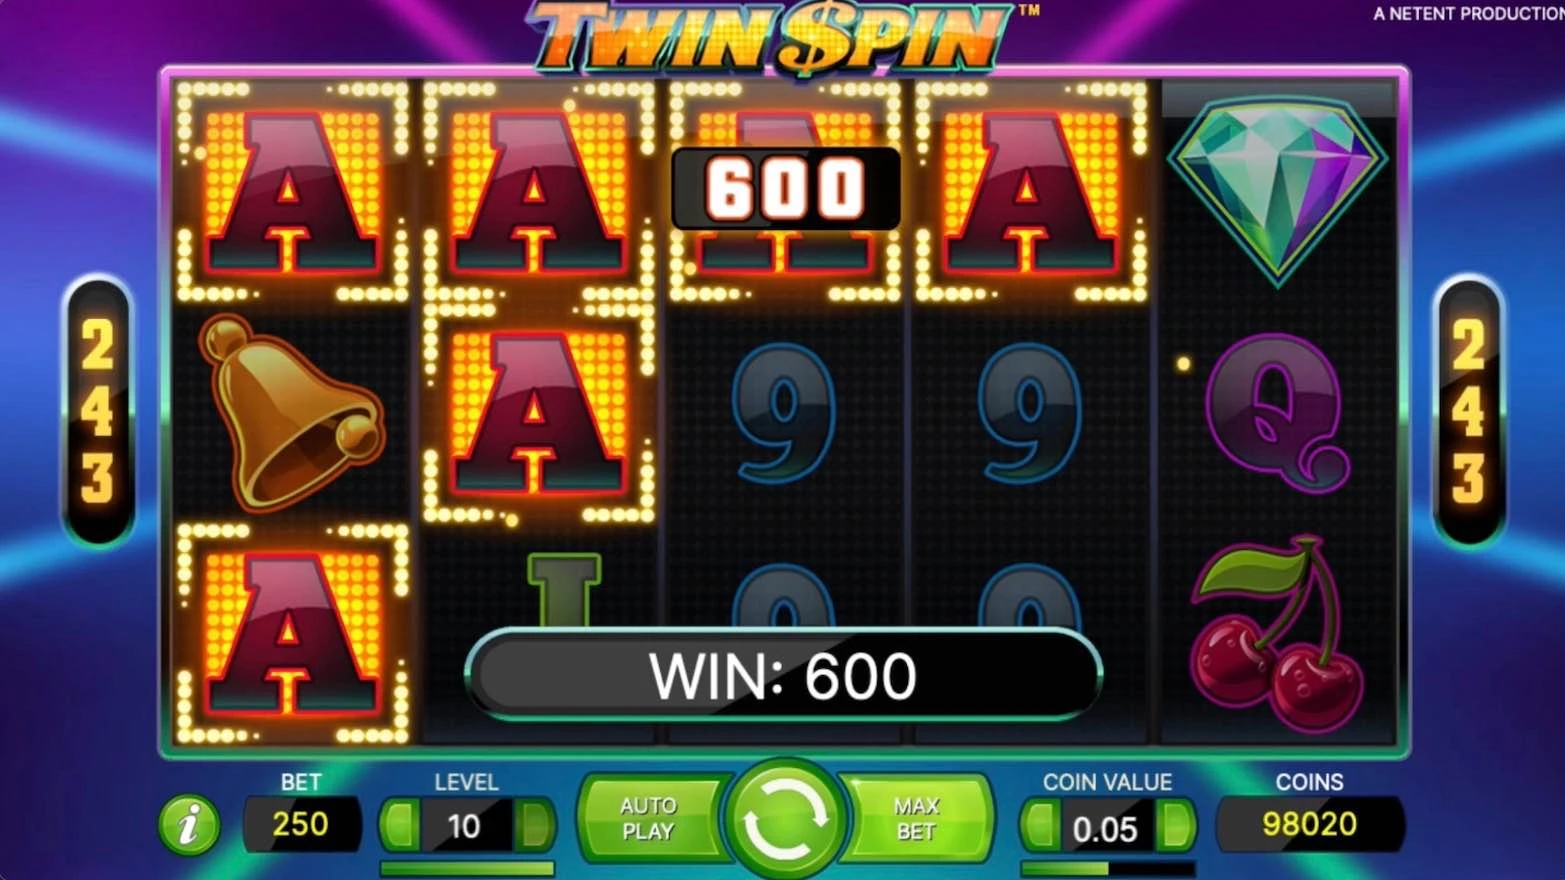 Twin Spin Slot by NetEnt - Aces Won $600